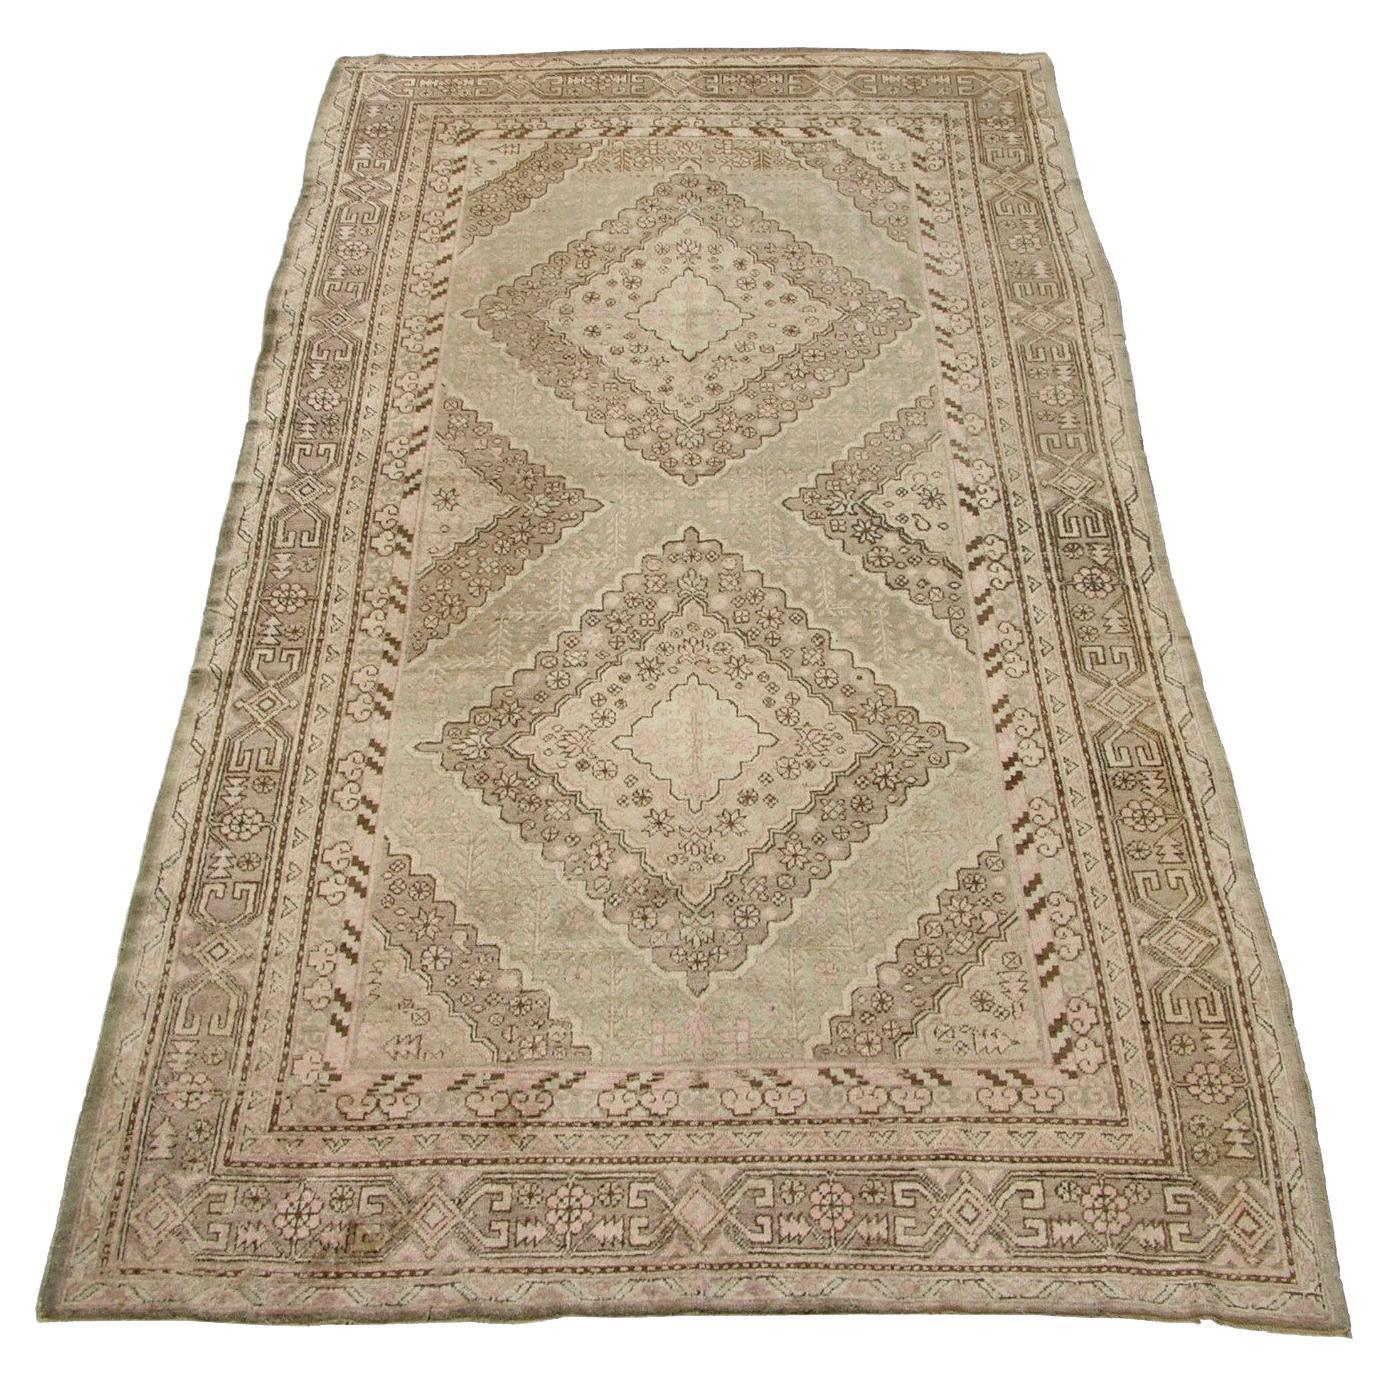 1900s Century Antique Samarkand Rug 12.6" X 6.4" For Sale